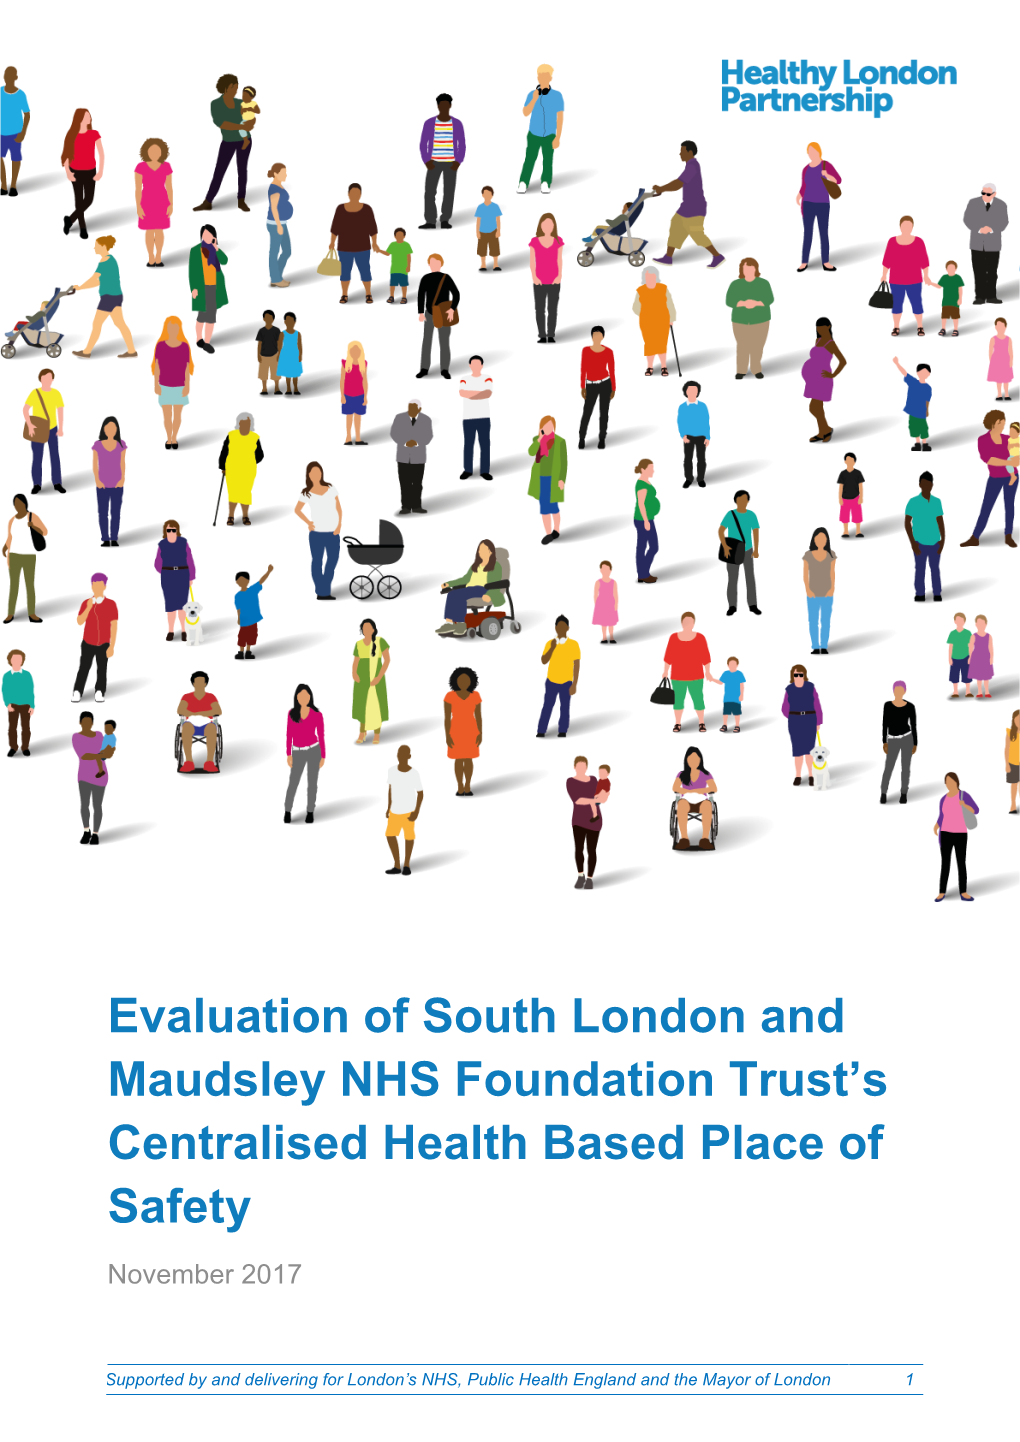 Slam Centralised Health Based Place of Safety Evaluation